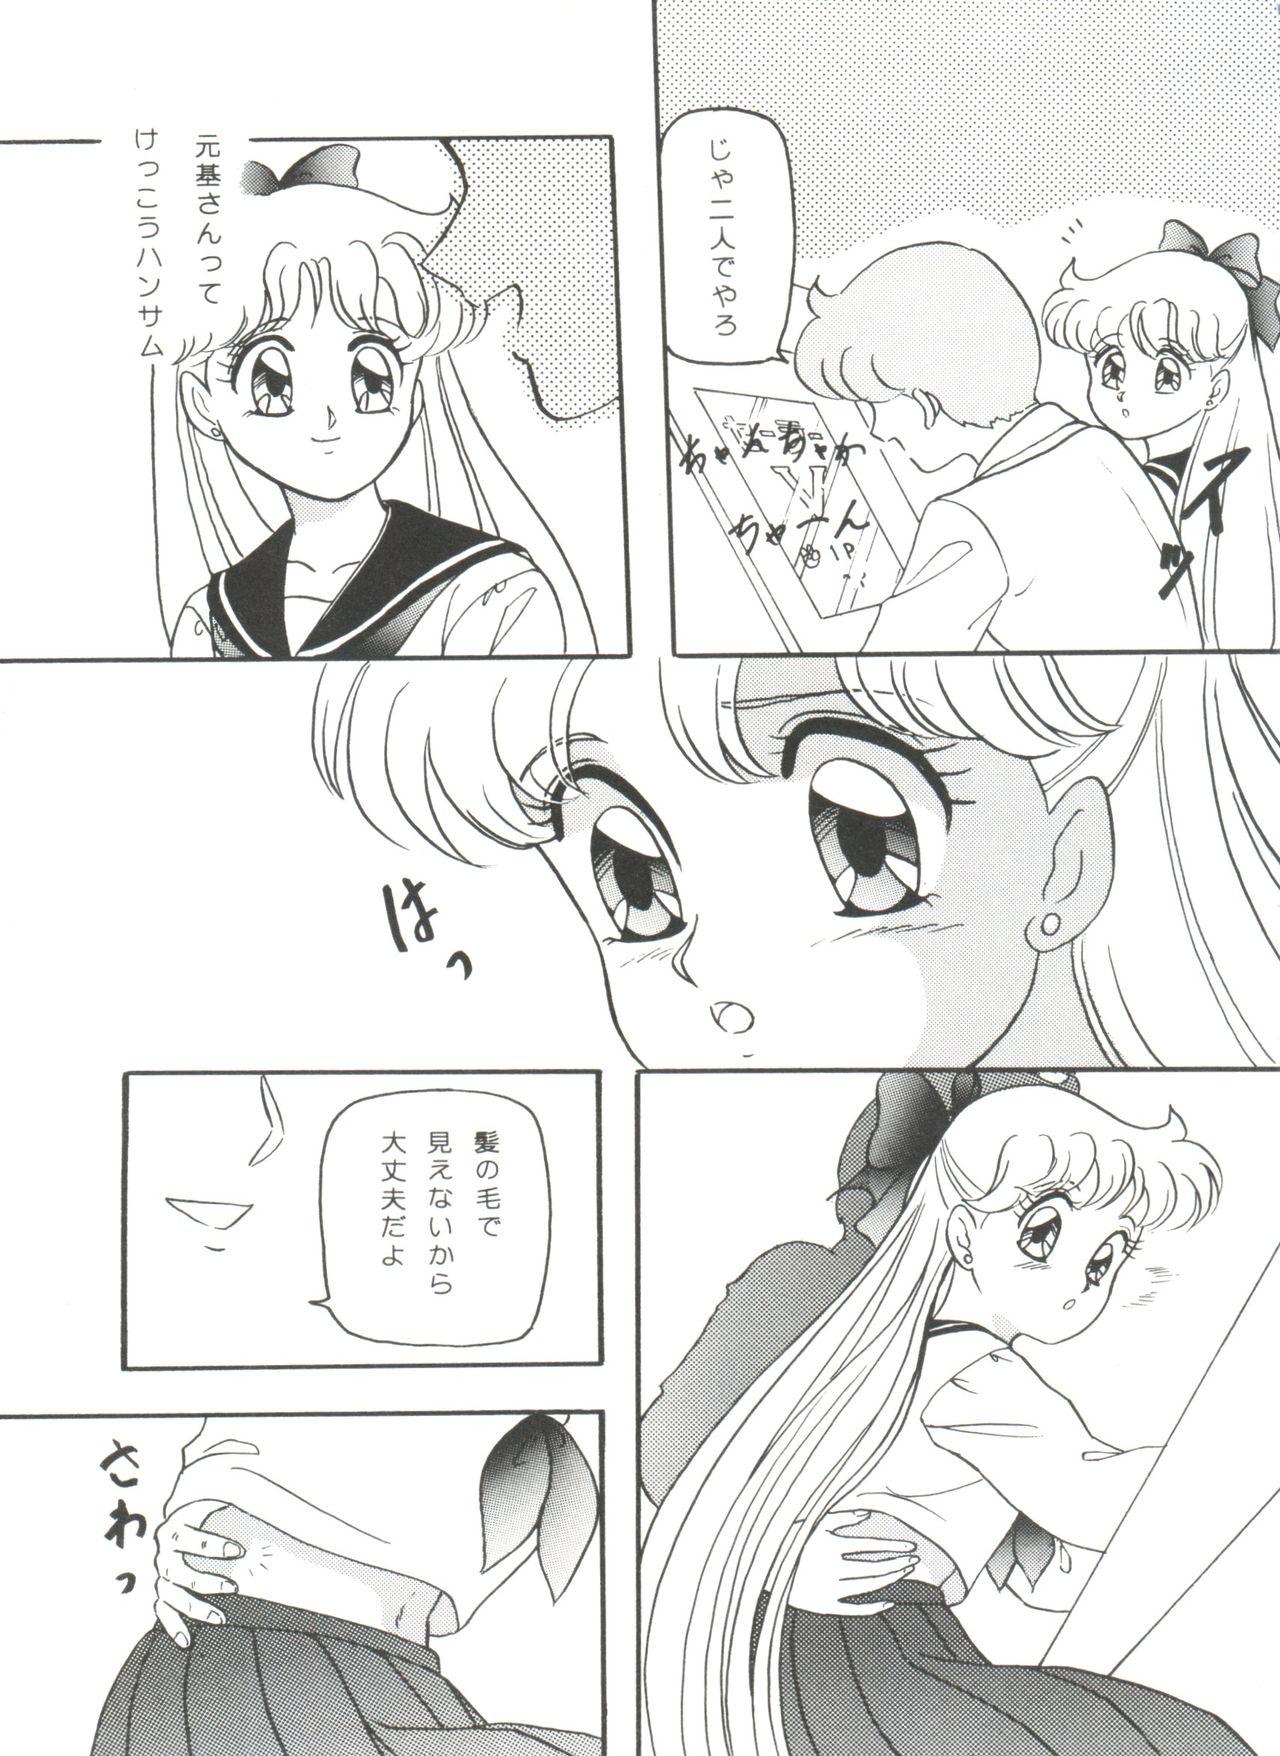 Chibola From the Moon - Sailor moon Fun - Page 7